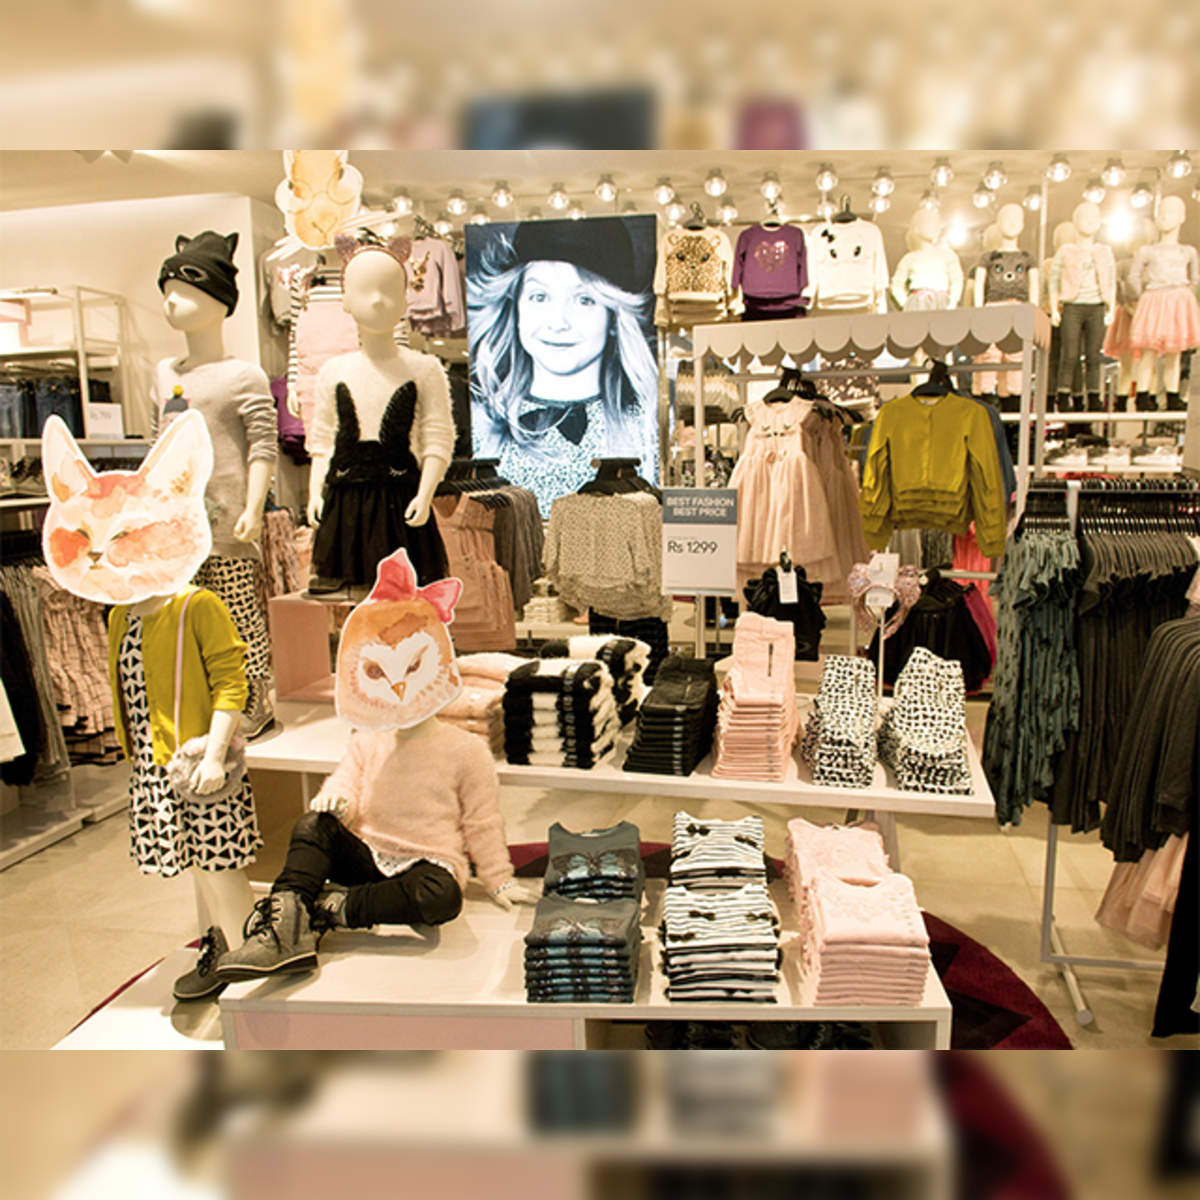 H&M: H&M tries on multiple personalities to grow - The Economic Times